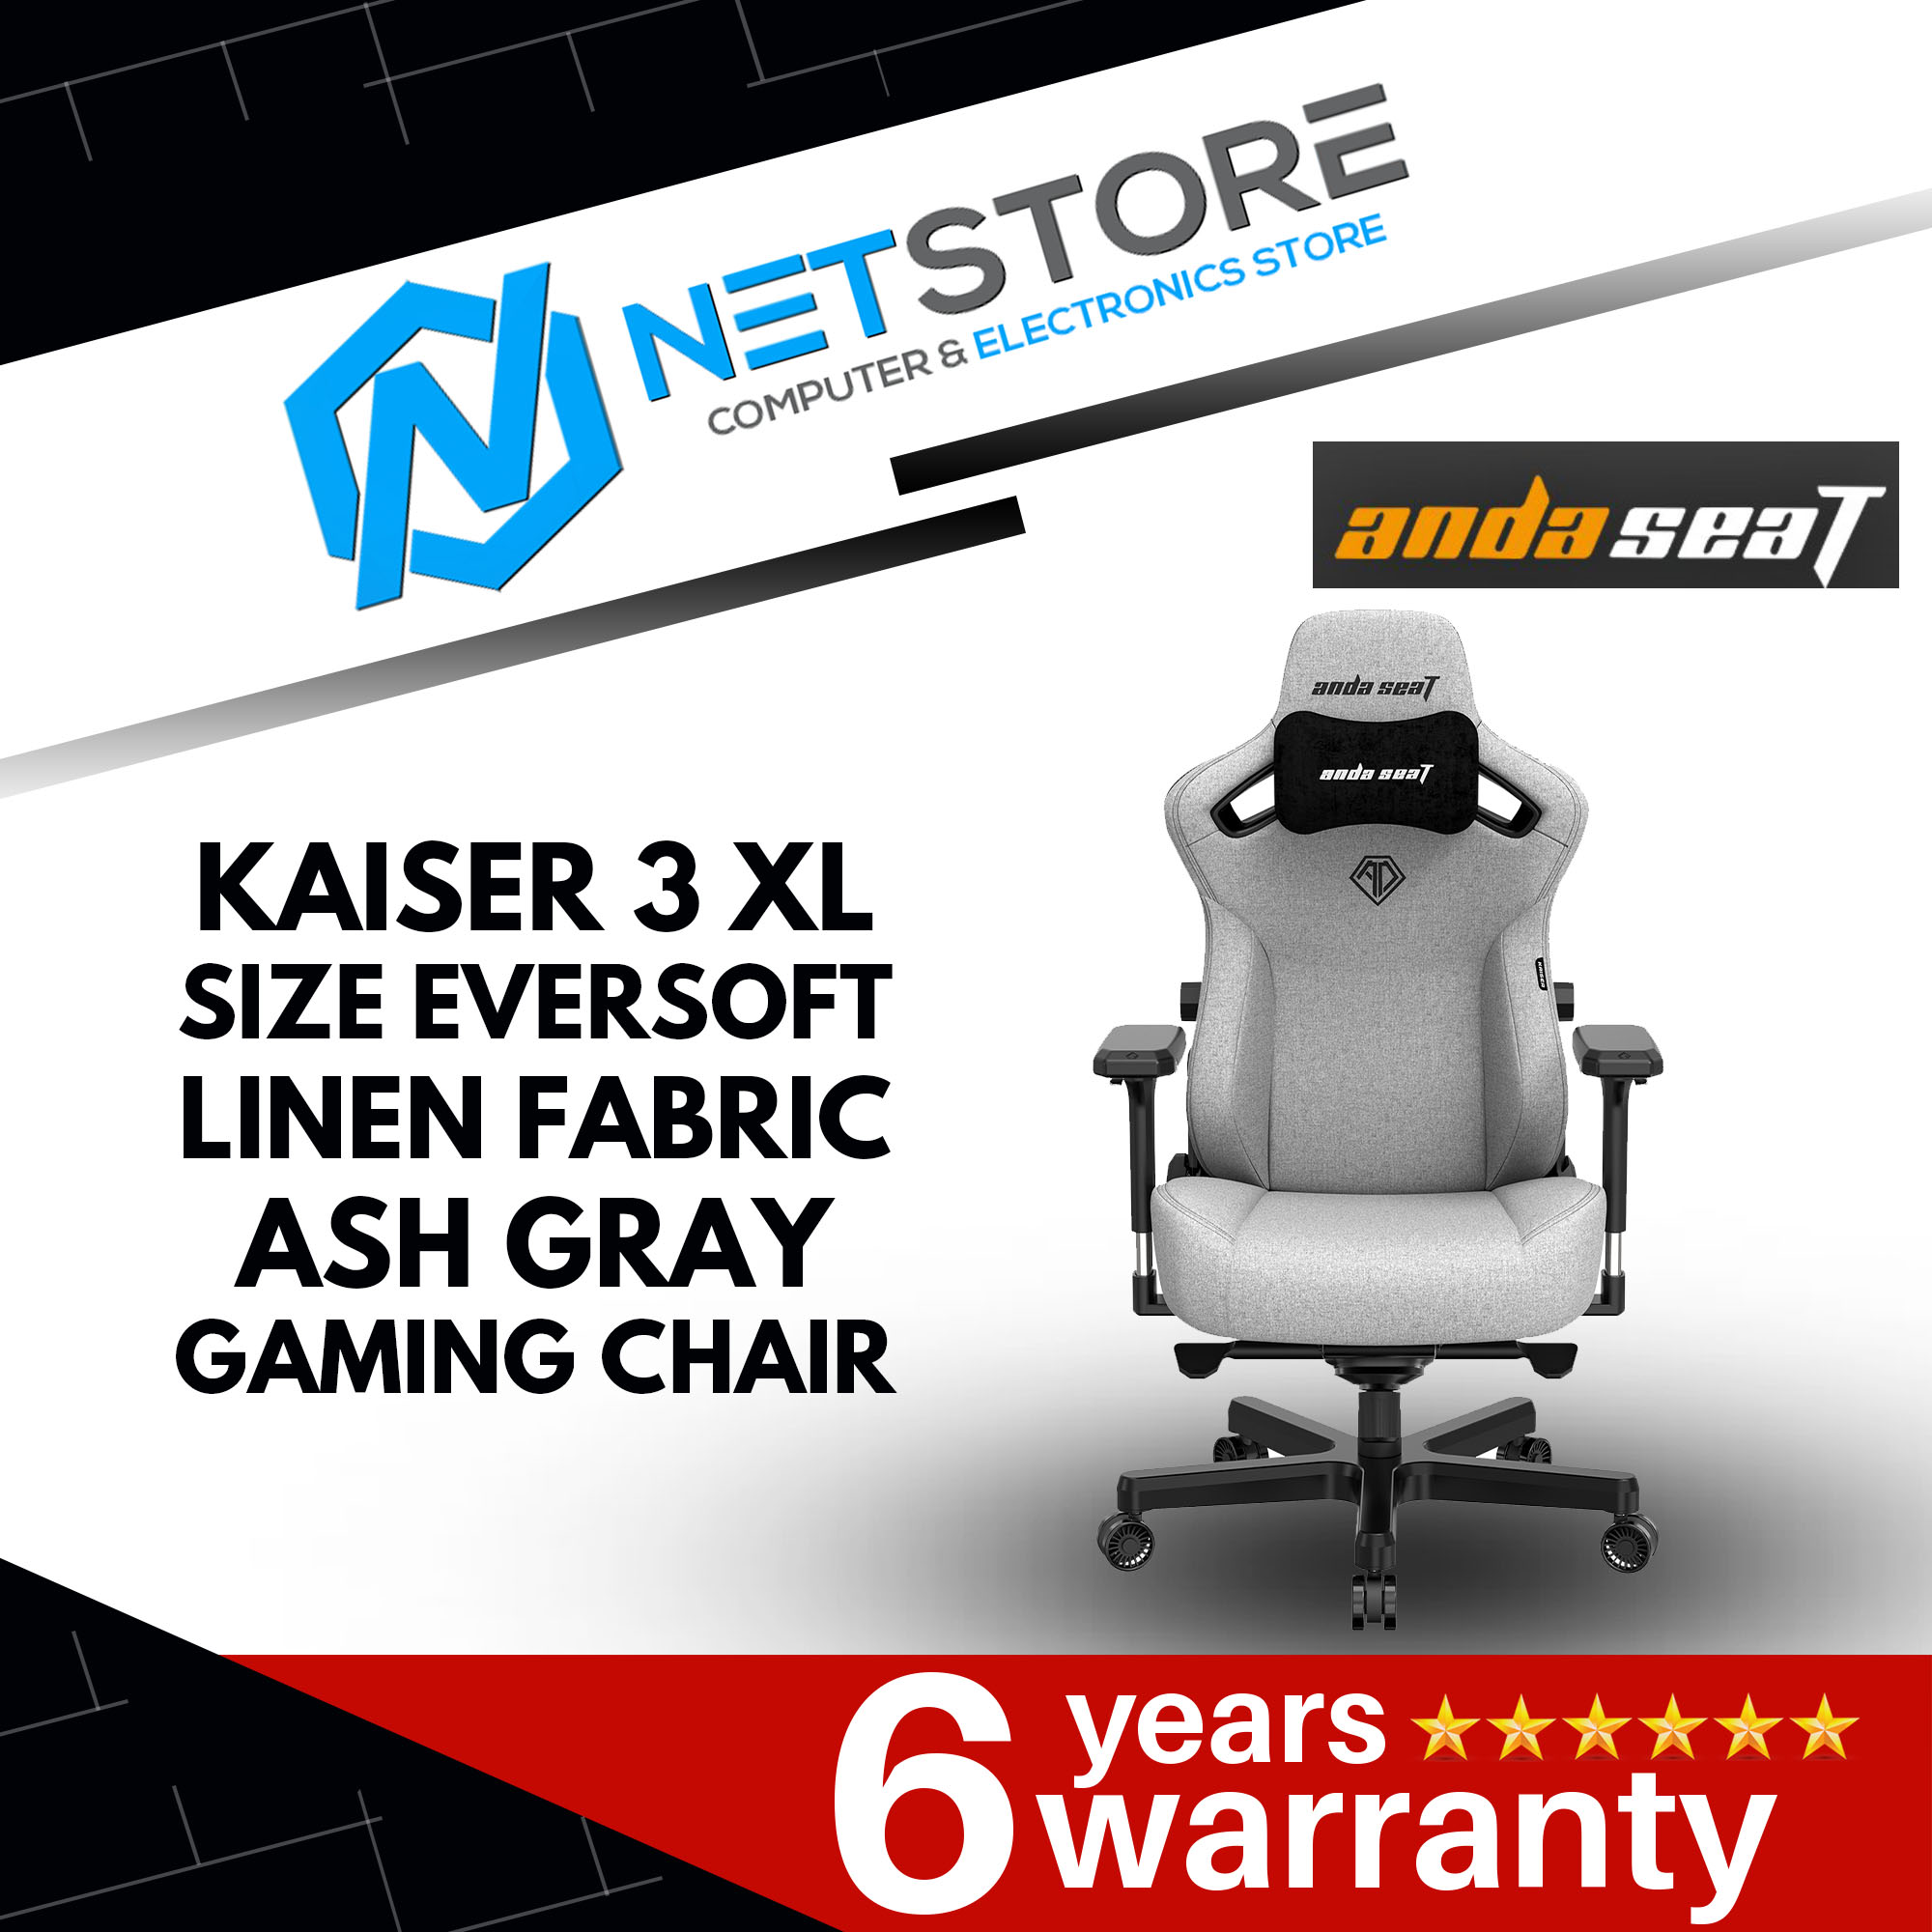 ANDA SEAT KAISER 3 XL SIZE EVERSOFT LINEN FABRIC-ASH GRAY GAMING CHAIR